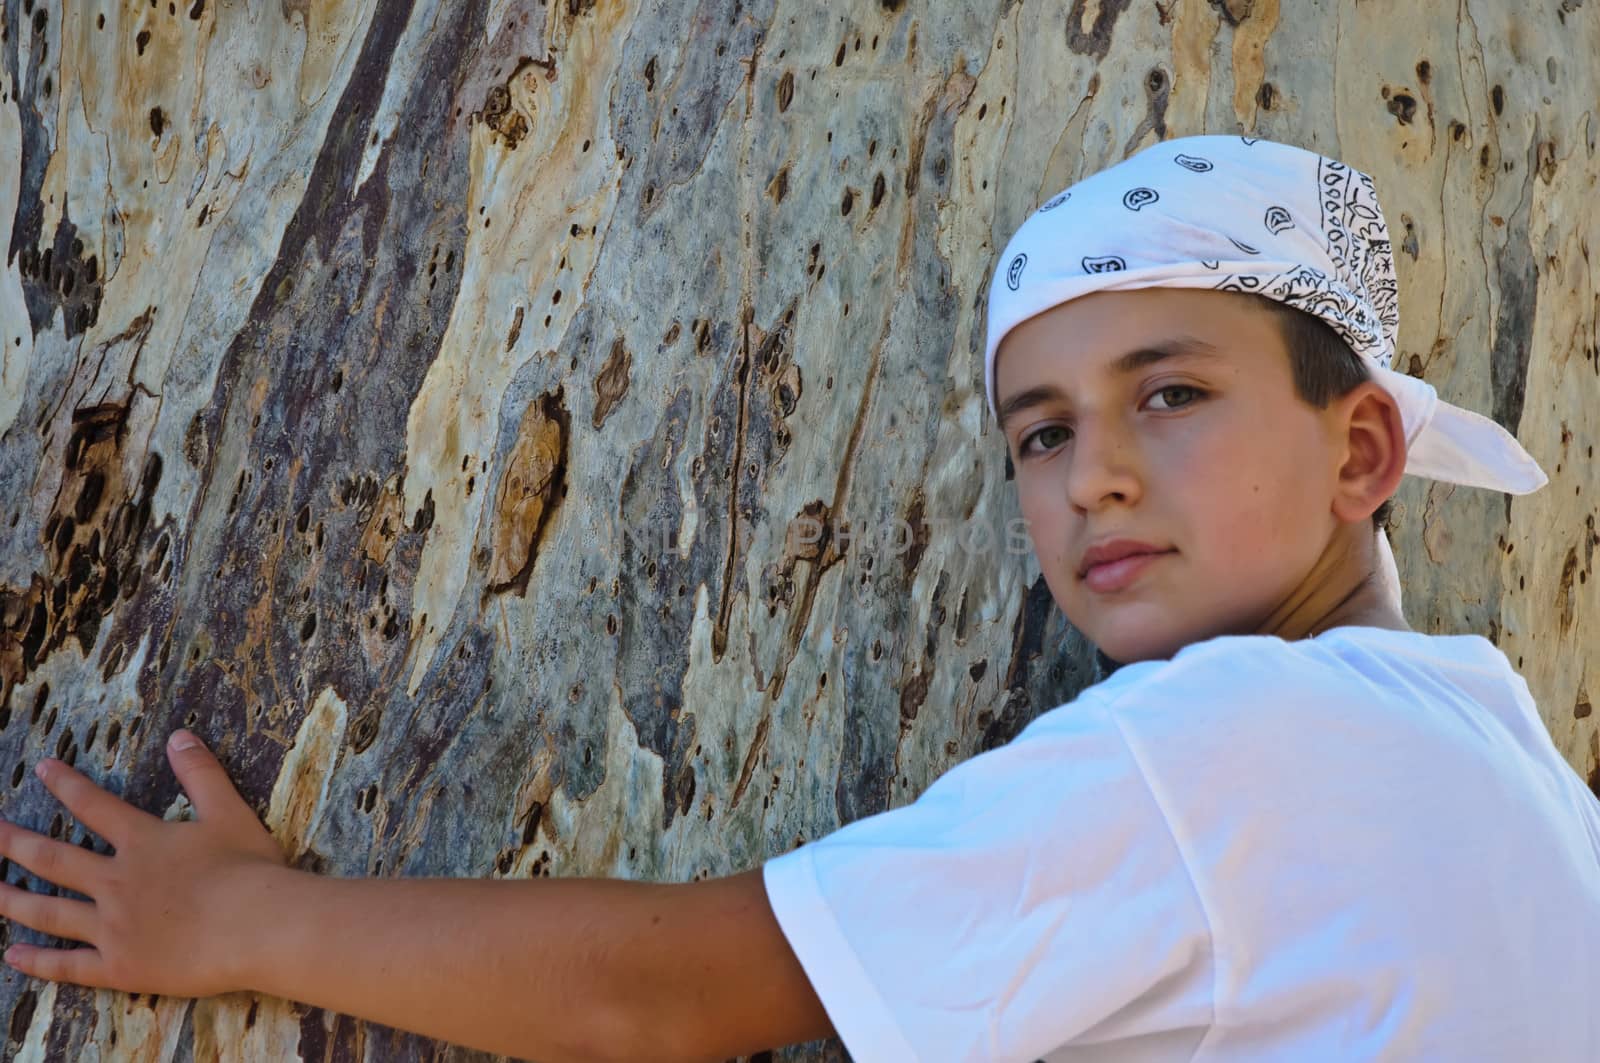 Portrait of a Boy in the bandana on the background of the trunk of eucalyptus.